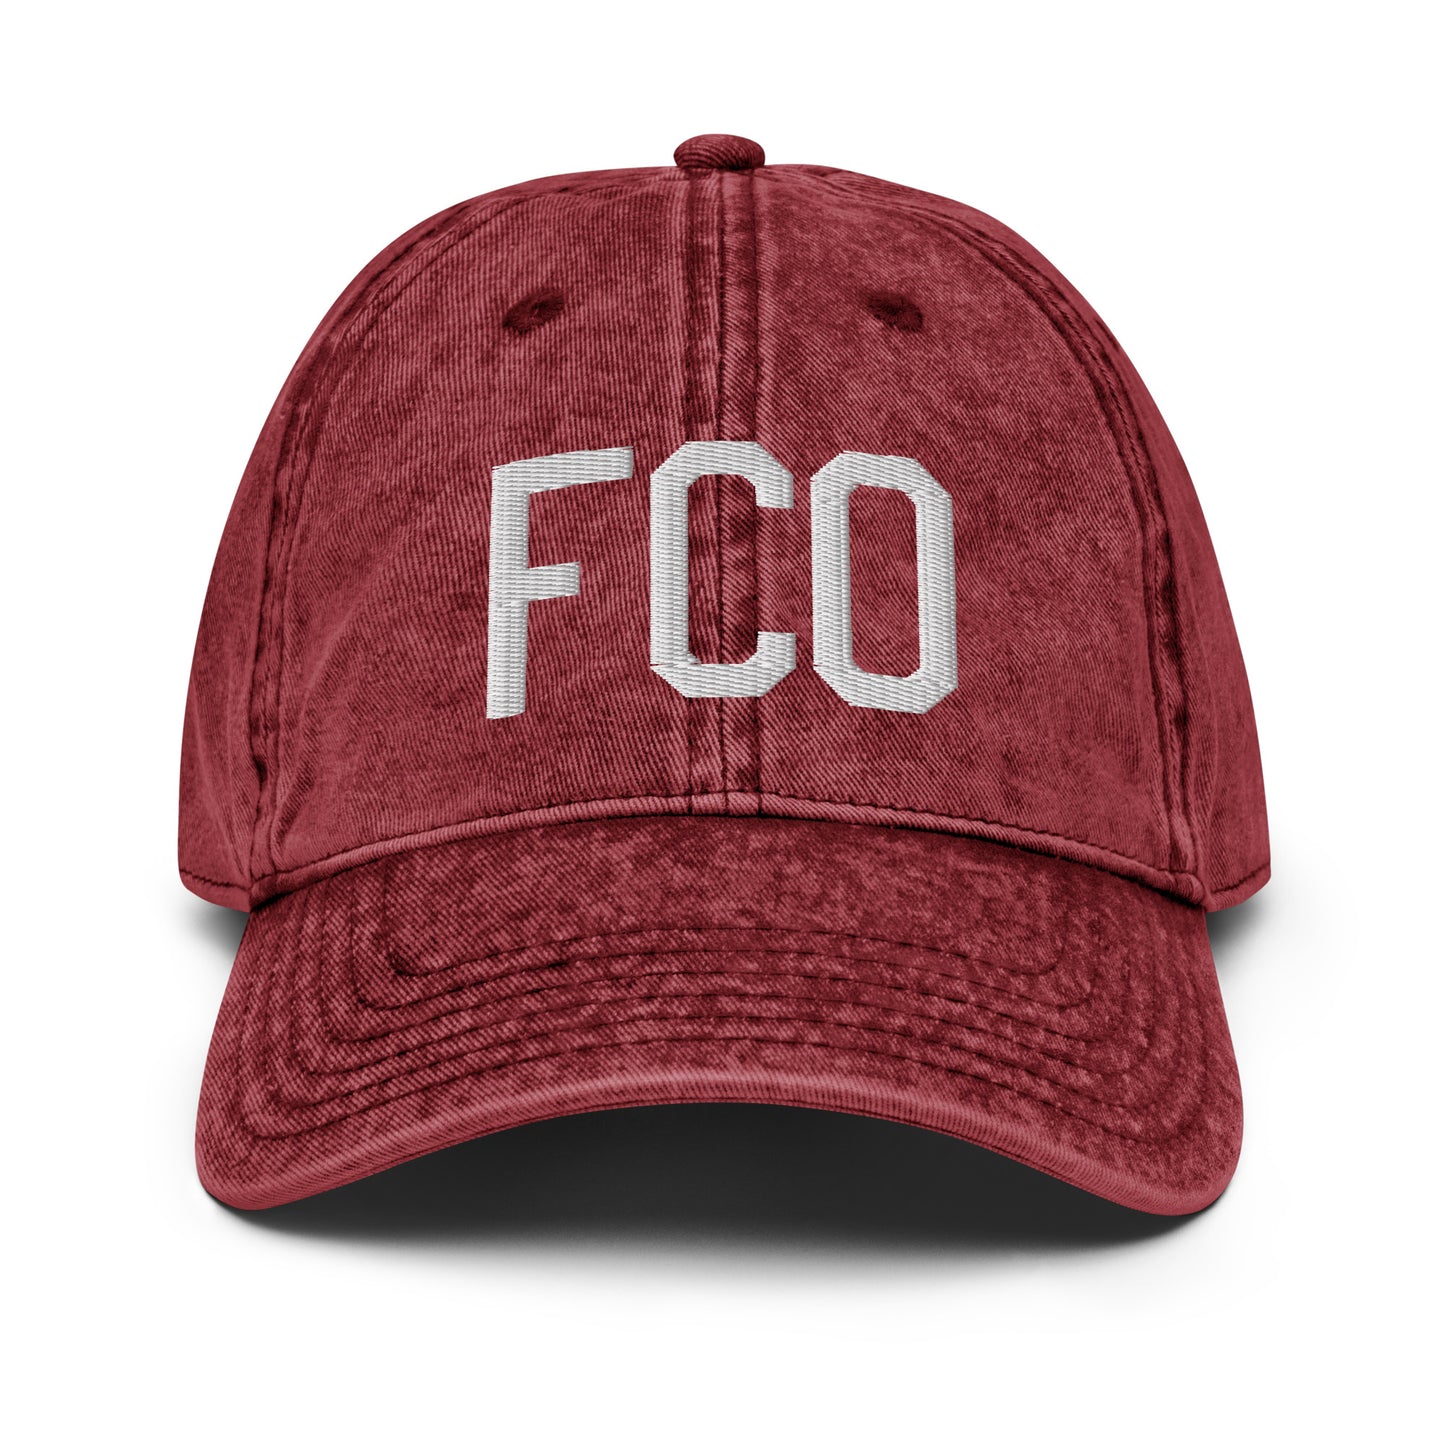 Airport Code Twill Cap - White • FCO Rome • YHM Designs - Image 19